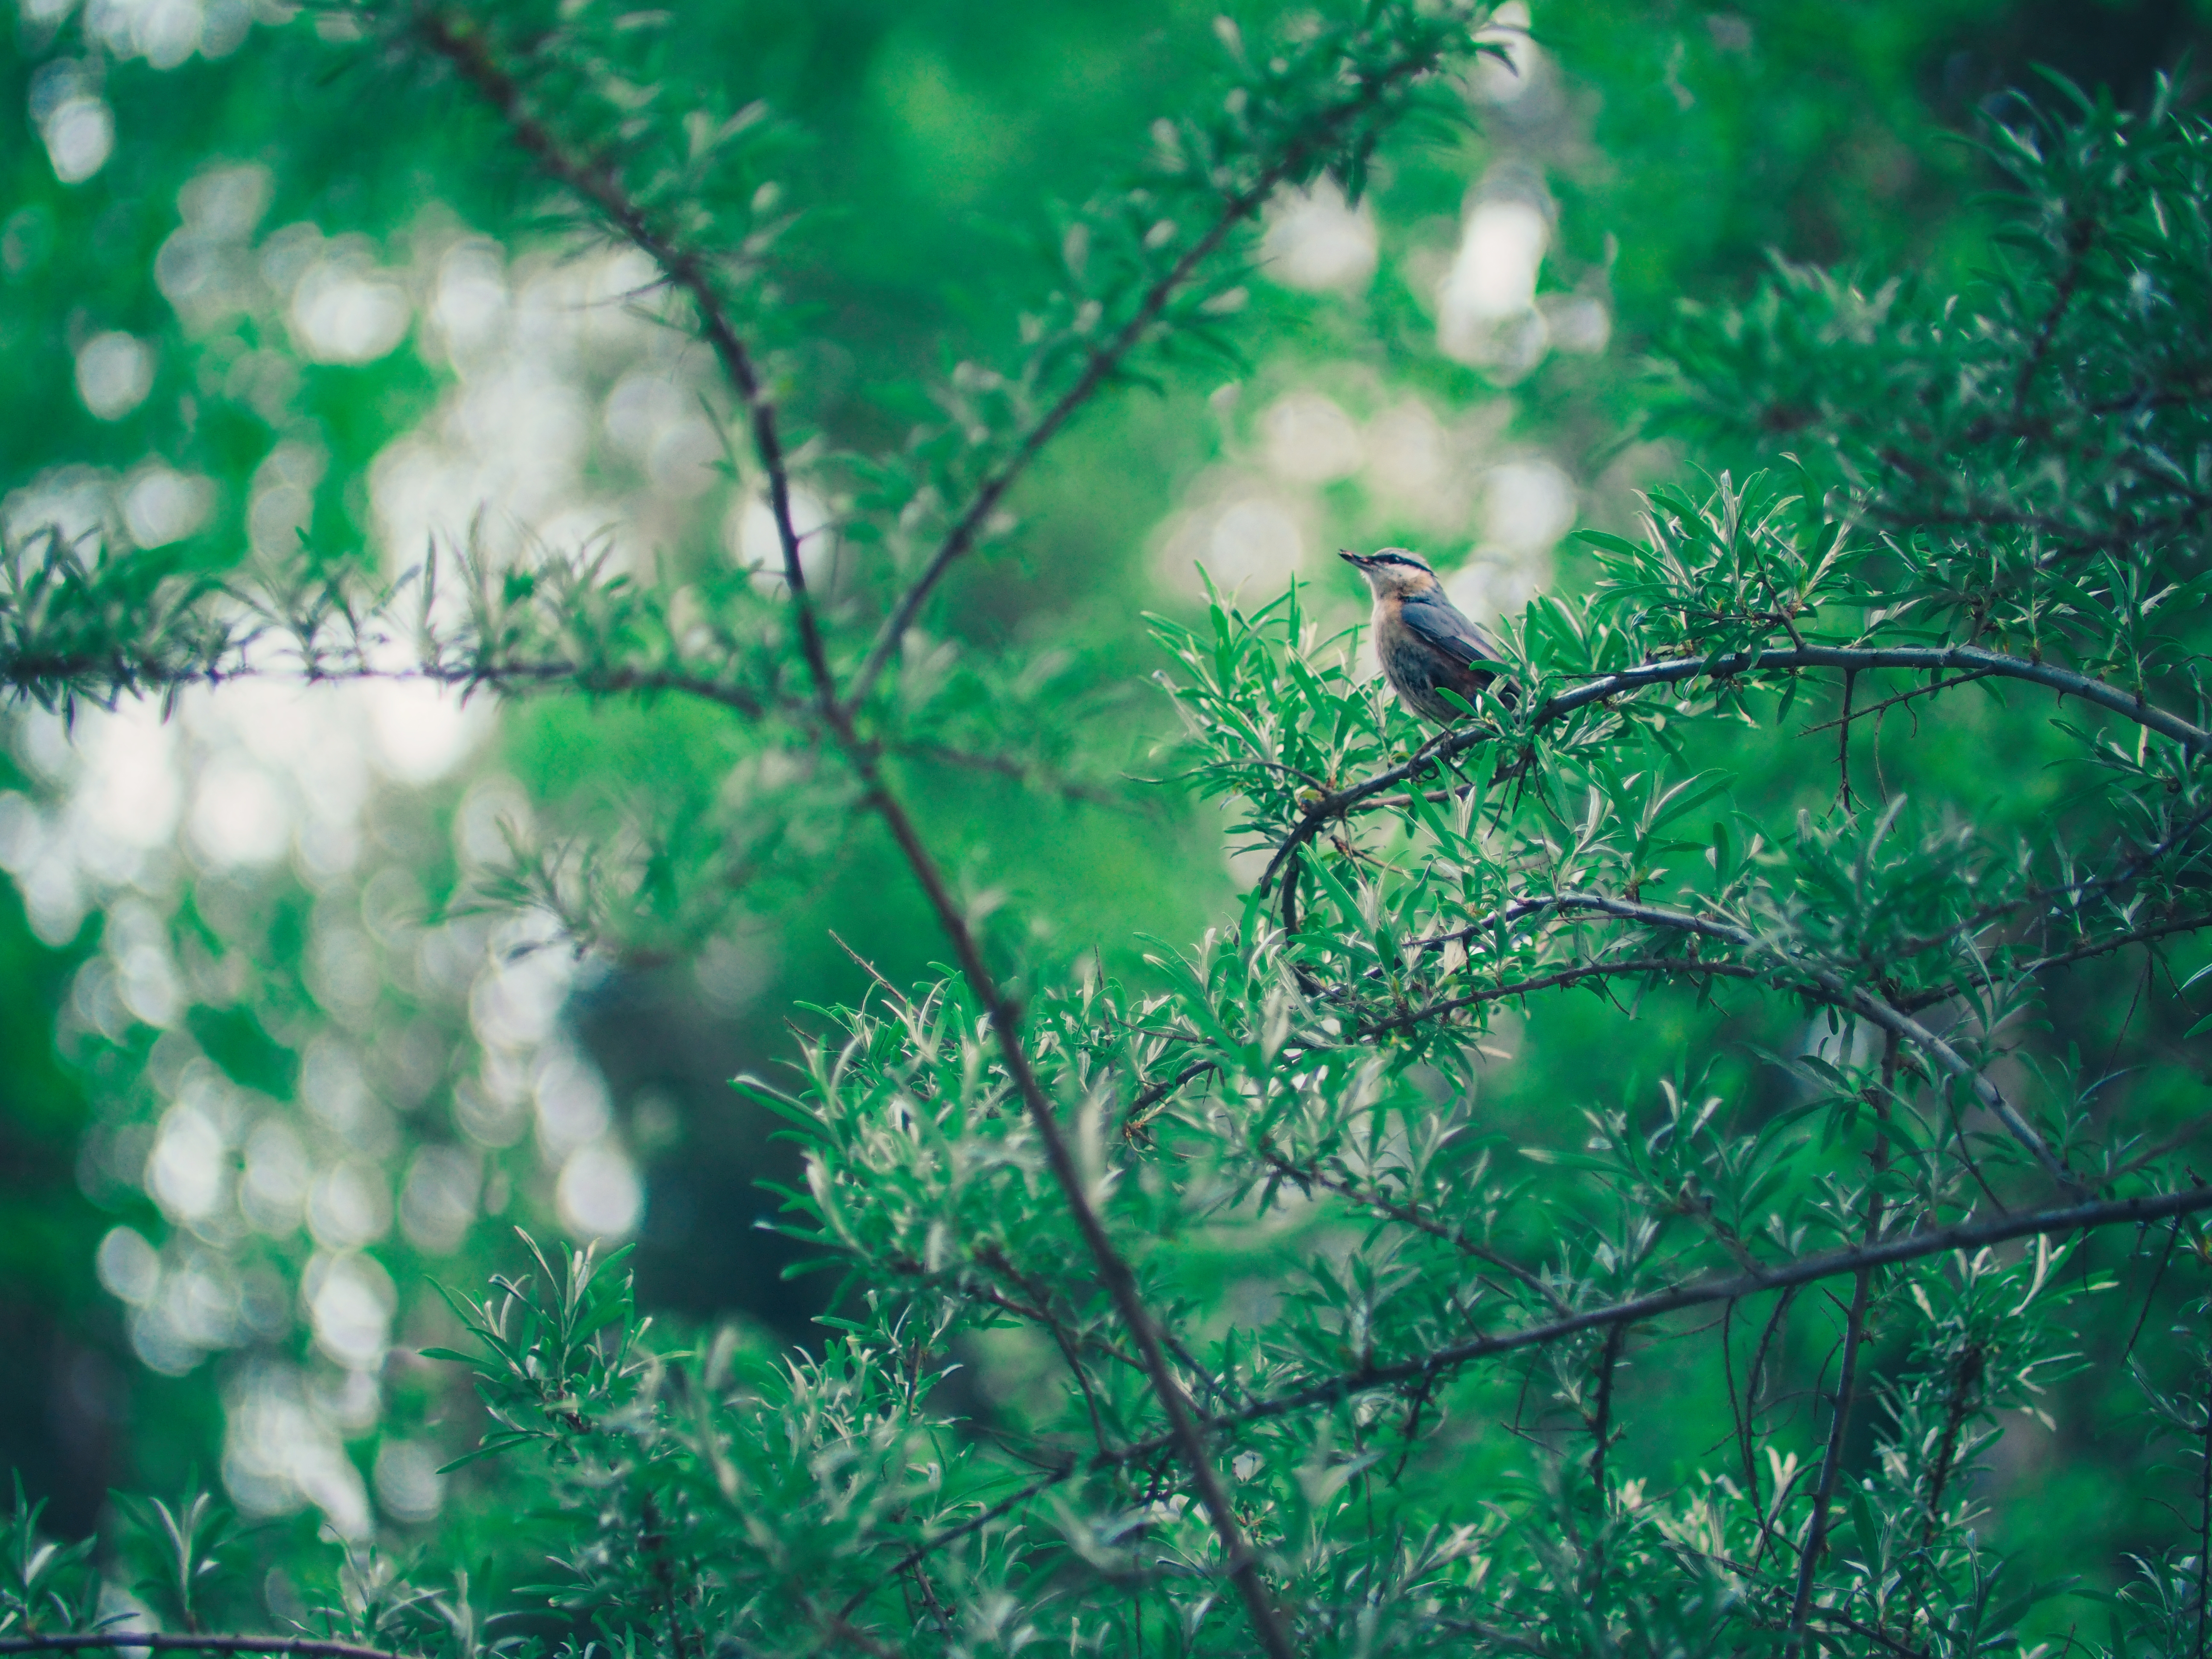 106170 download wallpaper bird, animals, leaves, blur, smooth, branch, bokeh, boquet screensavers and pictures for free